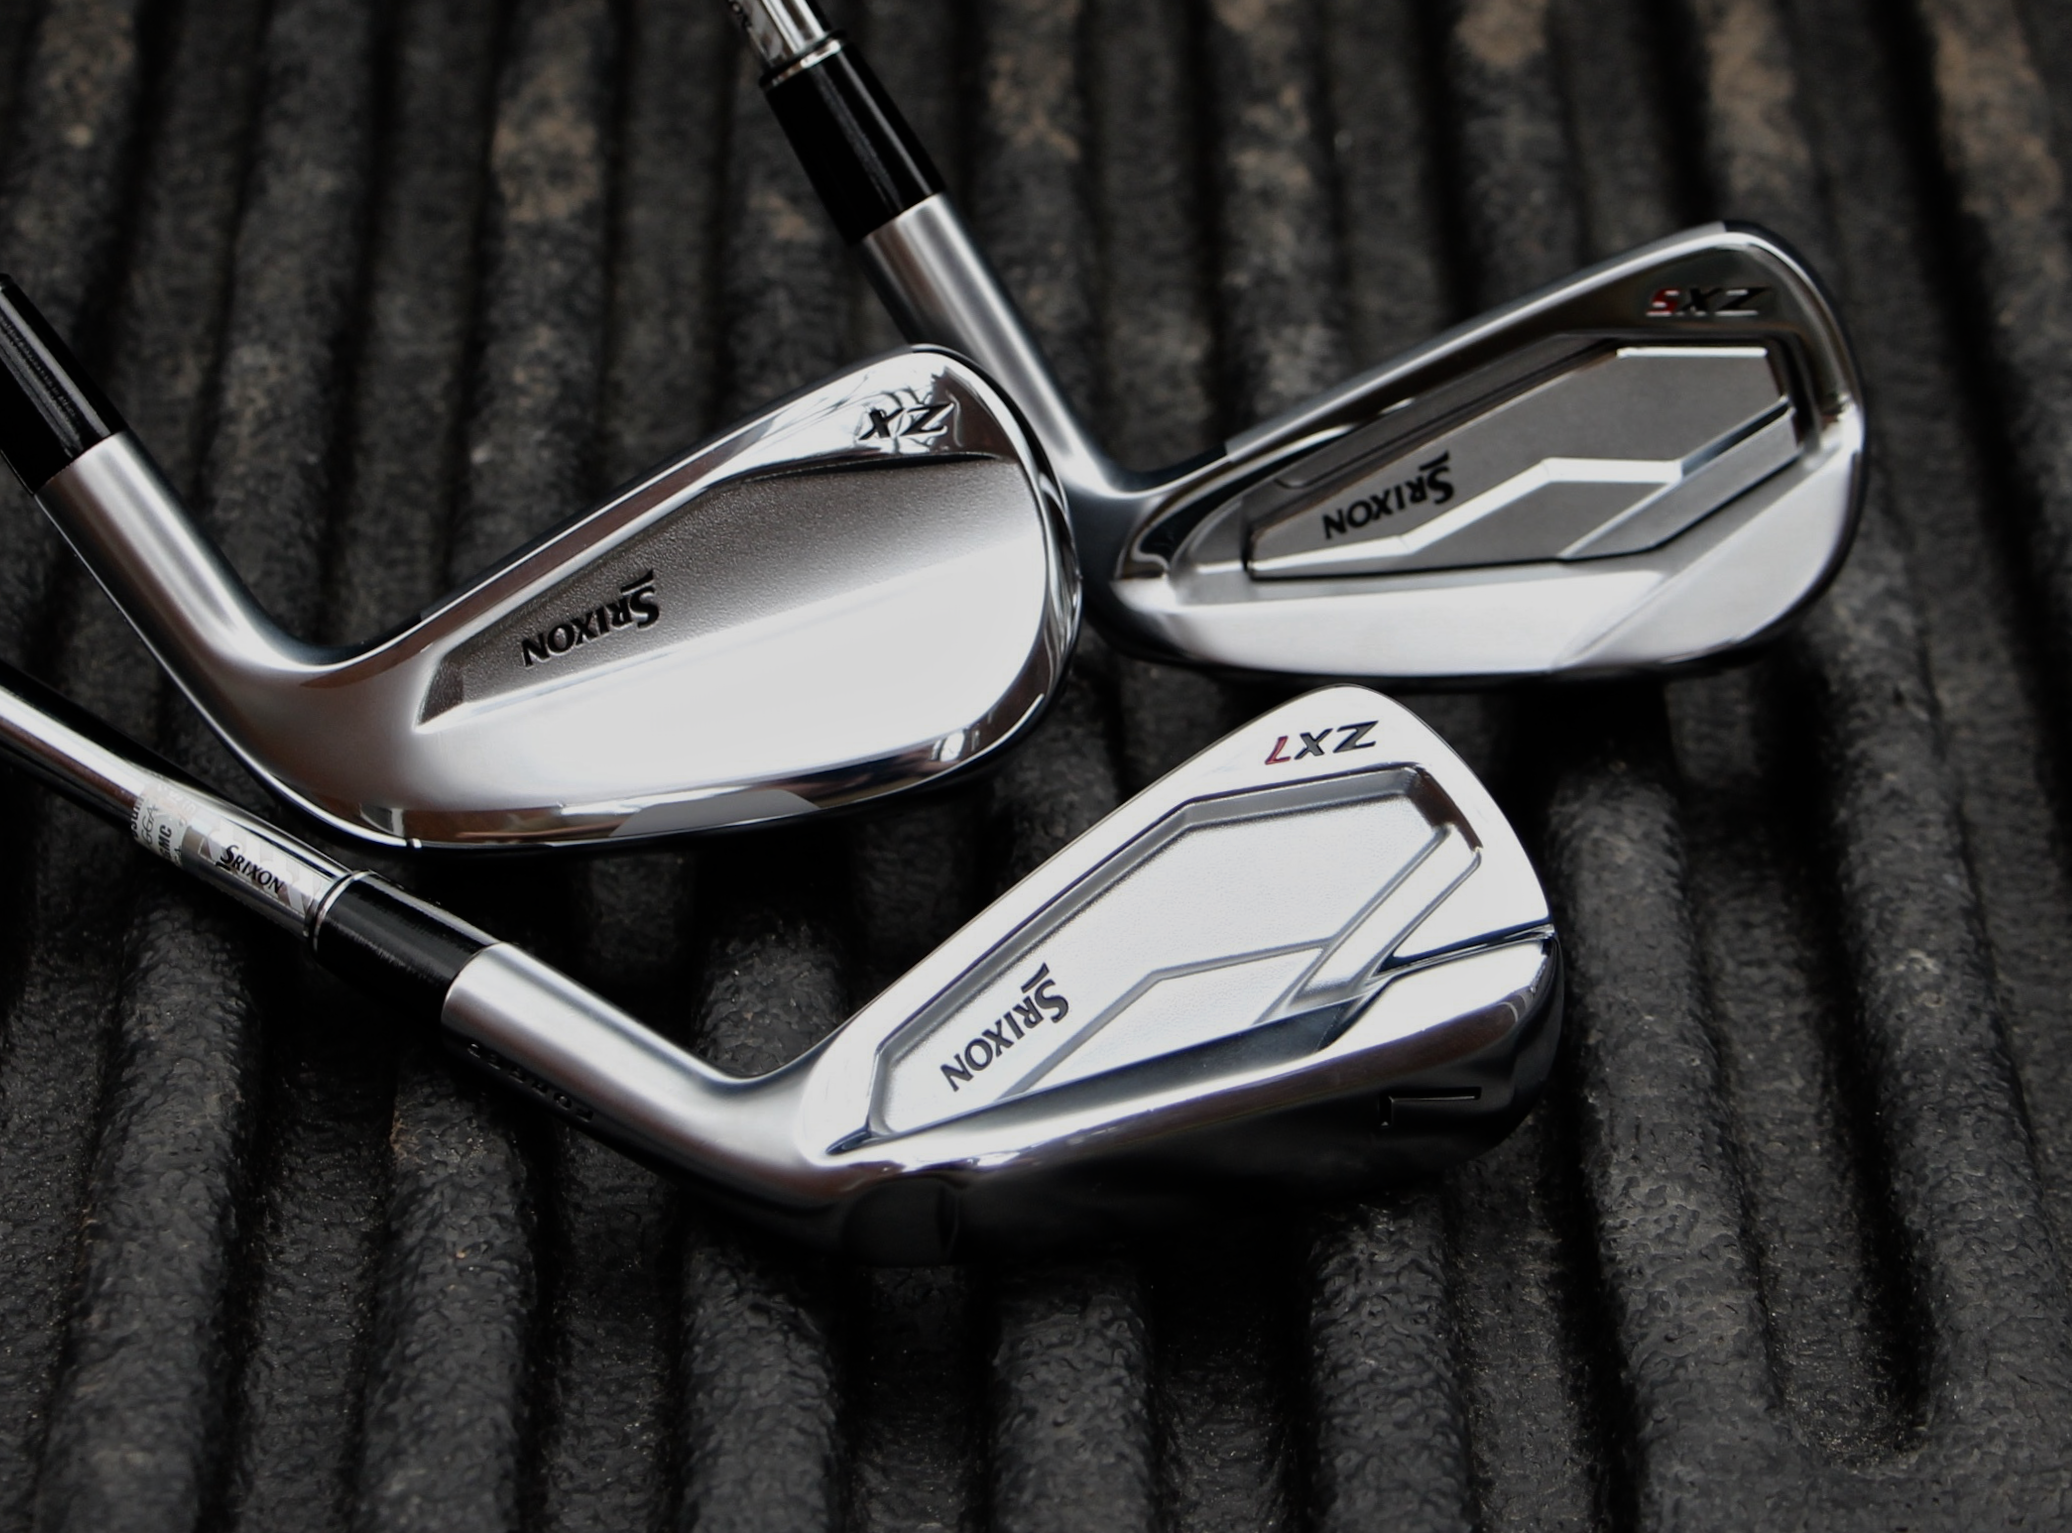 New Srixon Zx Series Irons Zx5 Zx7 And Utility Zx U Launched Golfwrx